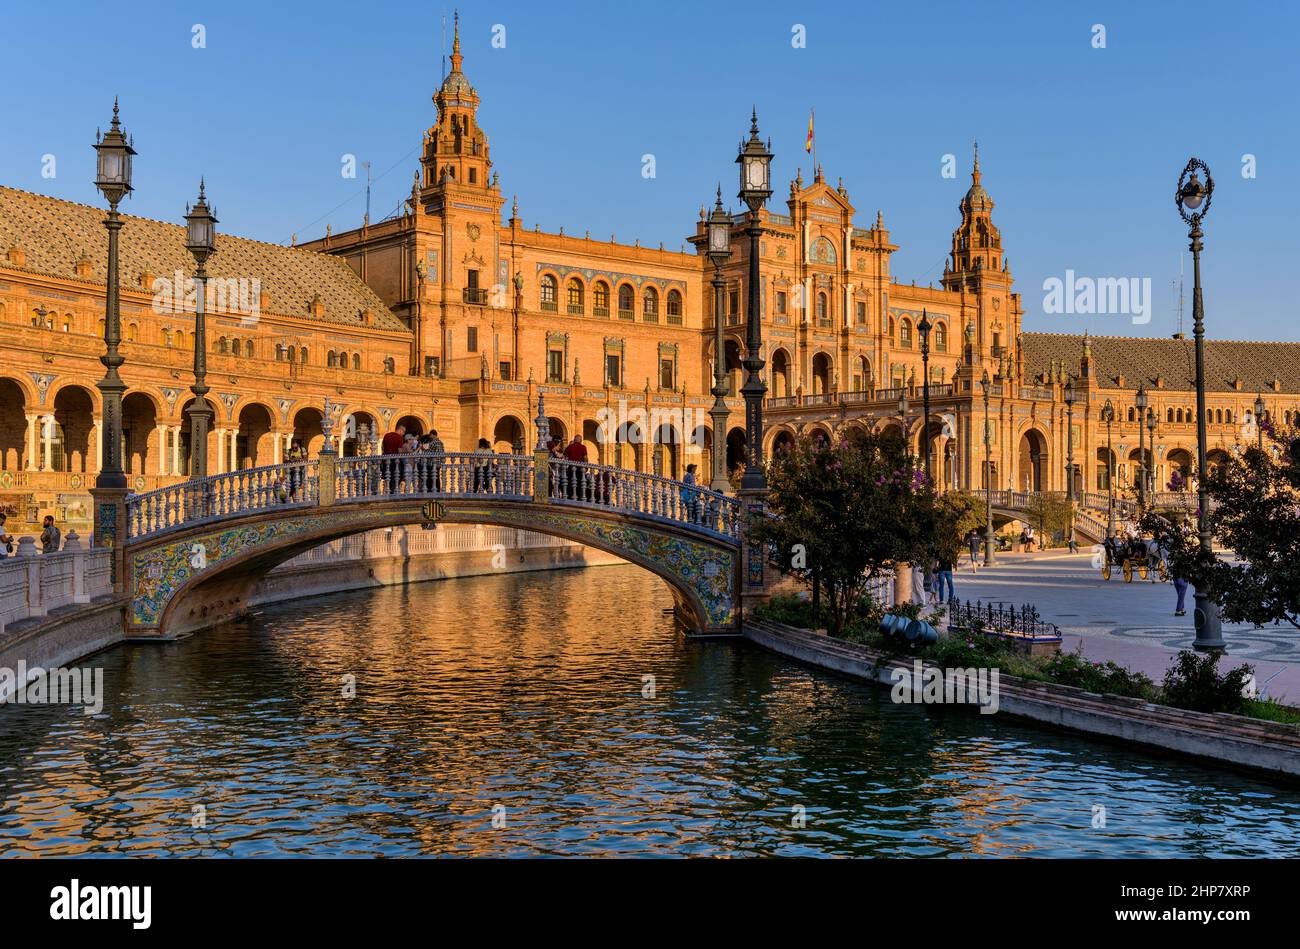 Sunset Spanish Square - Golden sunlight of Autumn sunset shines on brick and tile buildings of Spanish Square, reflecting in its canal. Seville, Spain Stock Photo